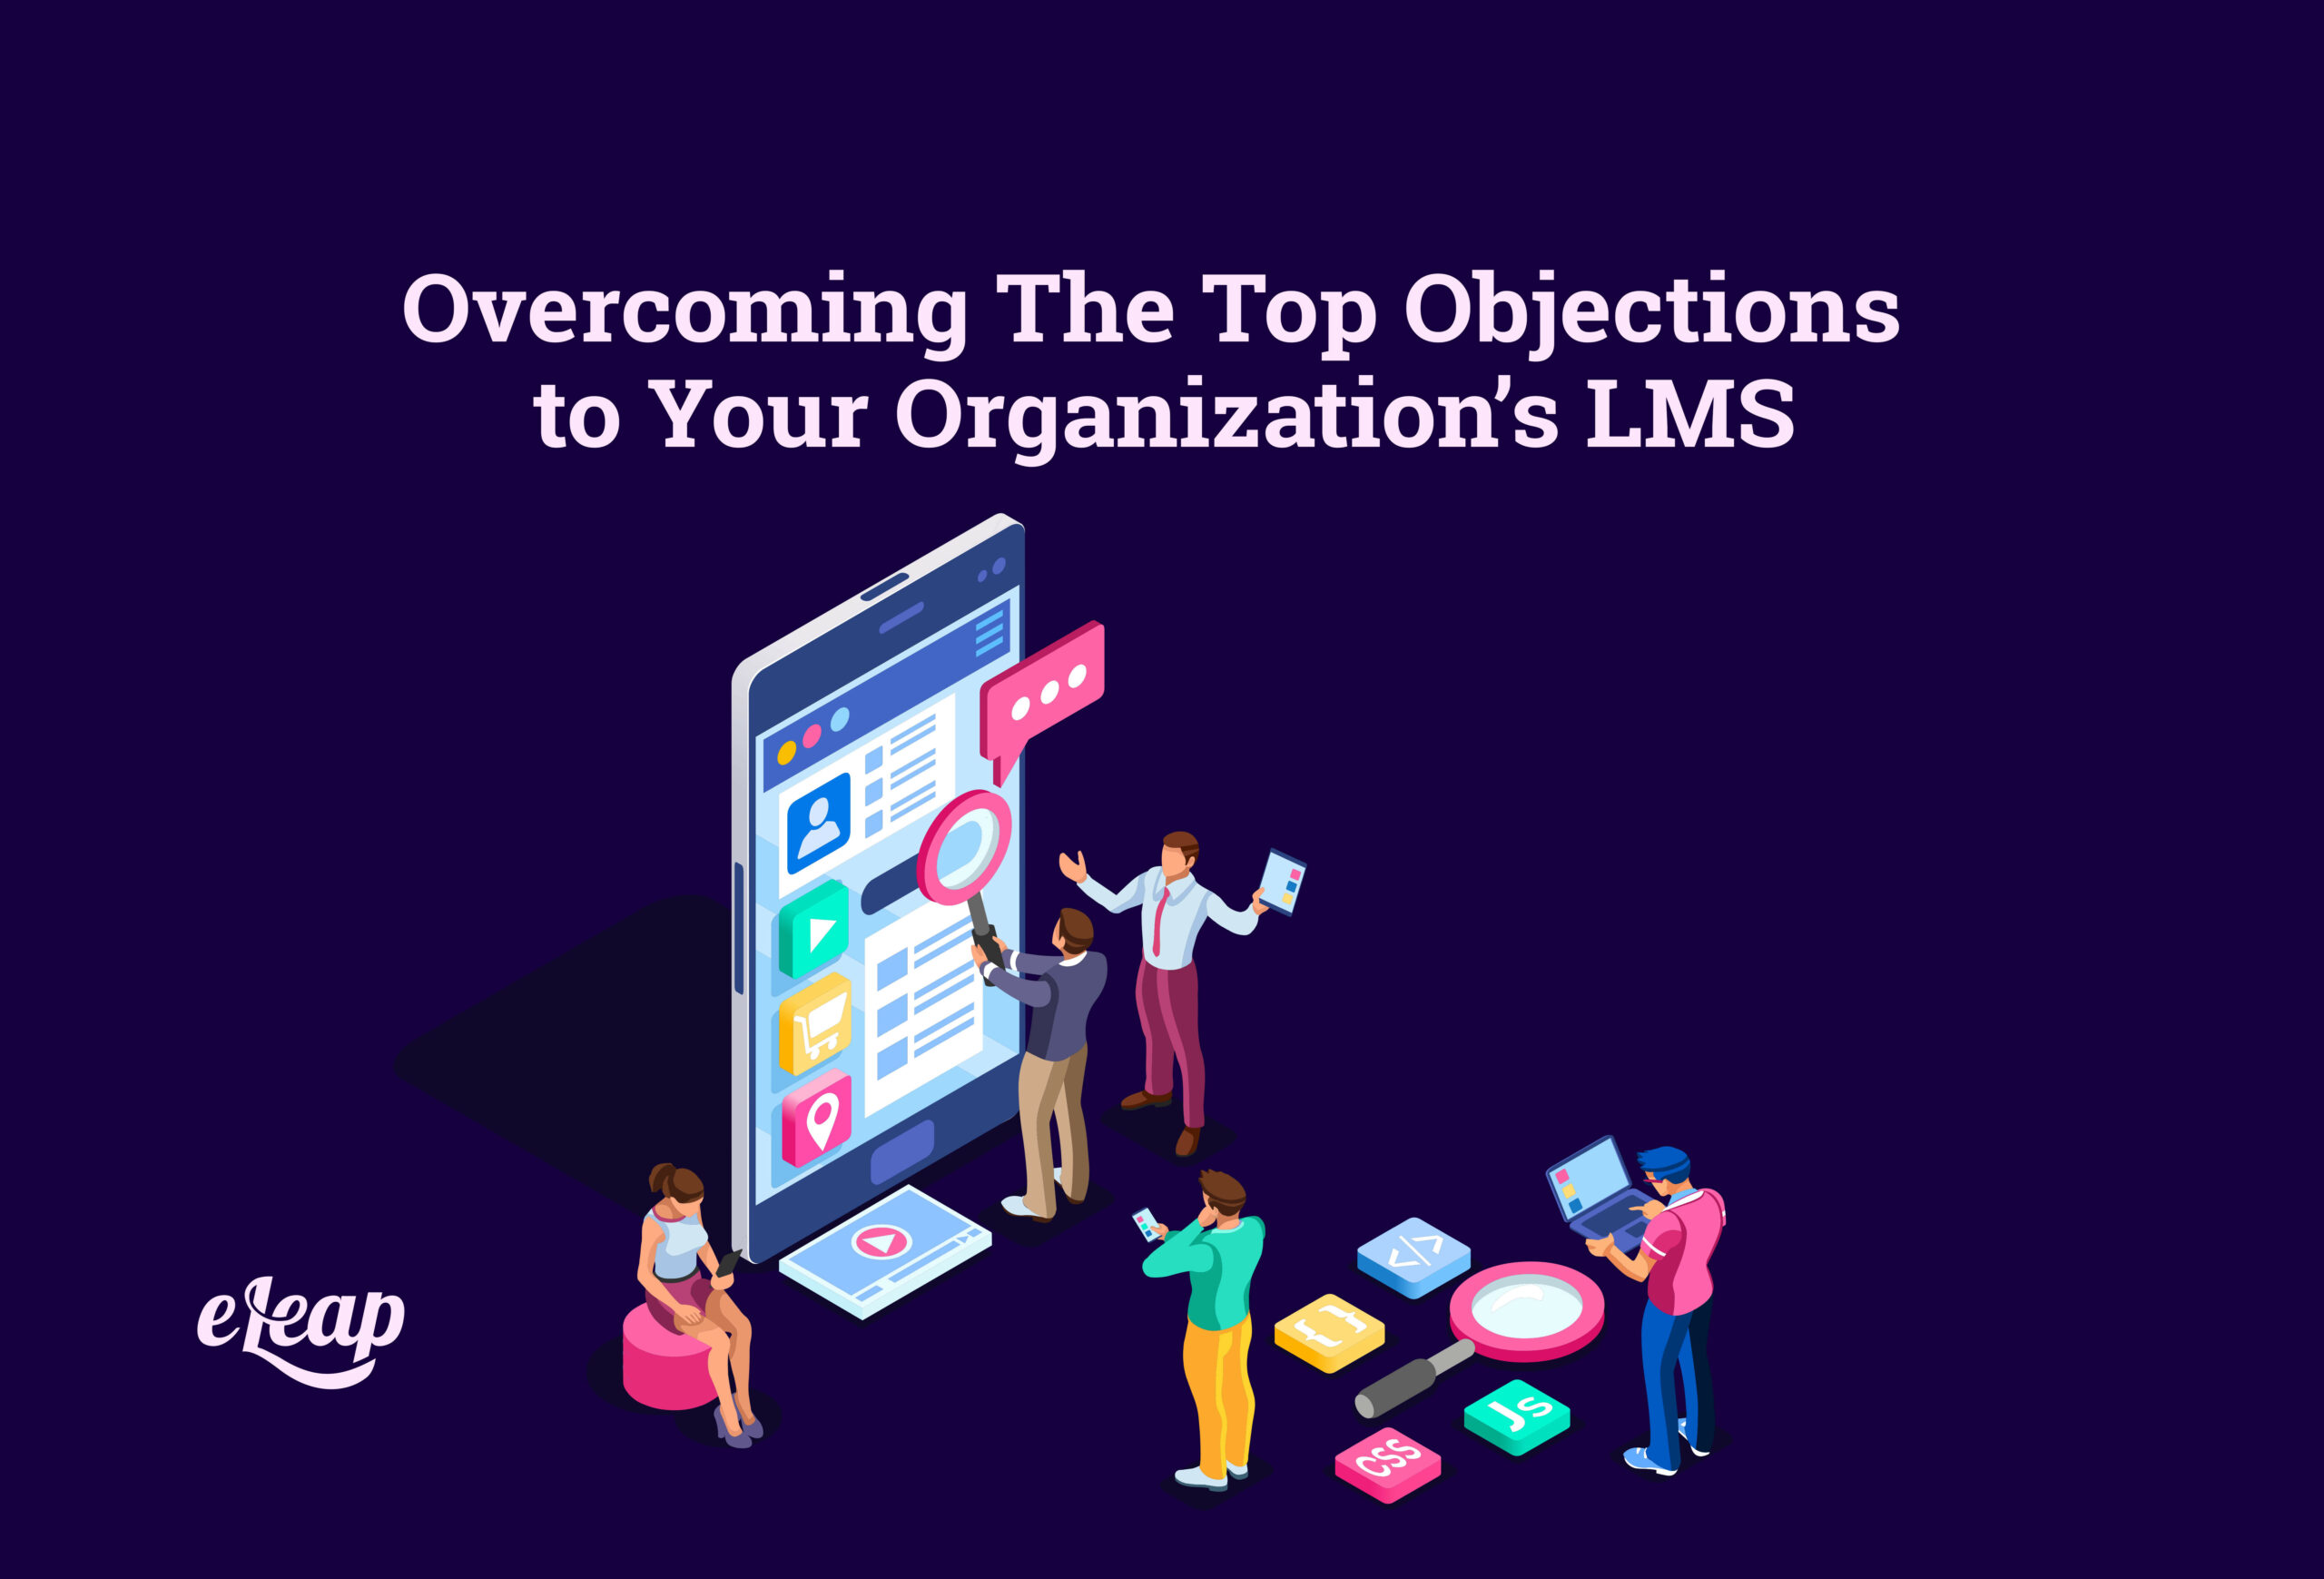 Overcoming The Top Objections to Your Organization’s LMS - eLeaP